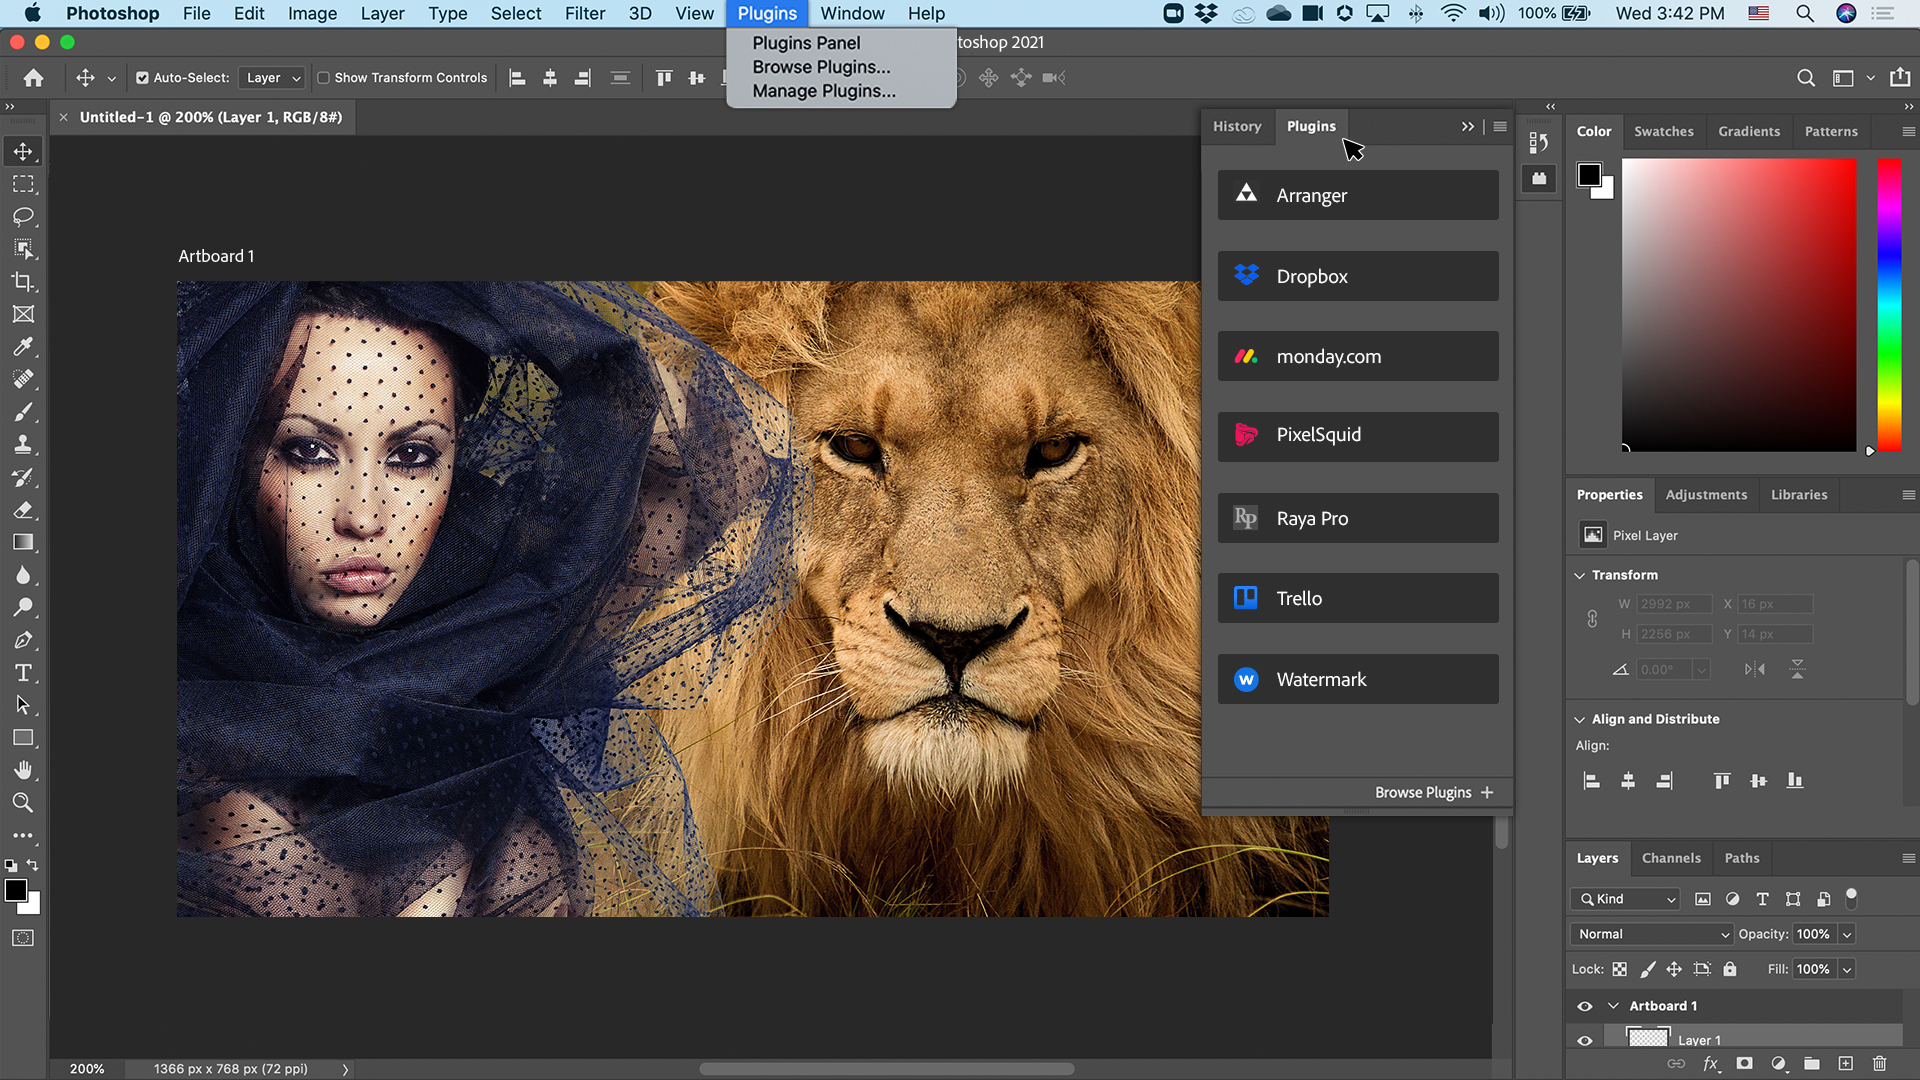 Adobe Photoshop Gets Huge Line-Up Of New Features & Adobe Lightroom Is  Updated With An Improved Colour Grading Tool | ePHOTOzine